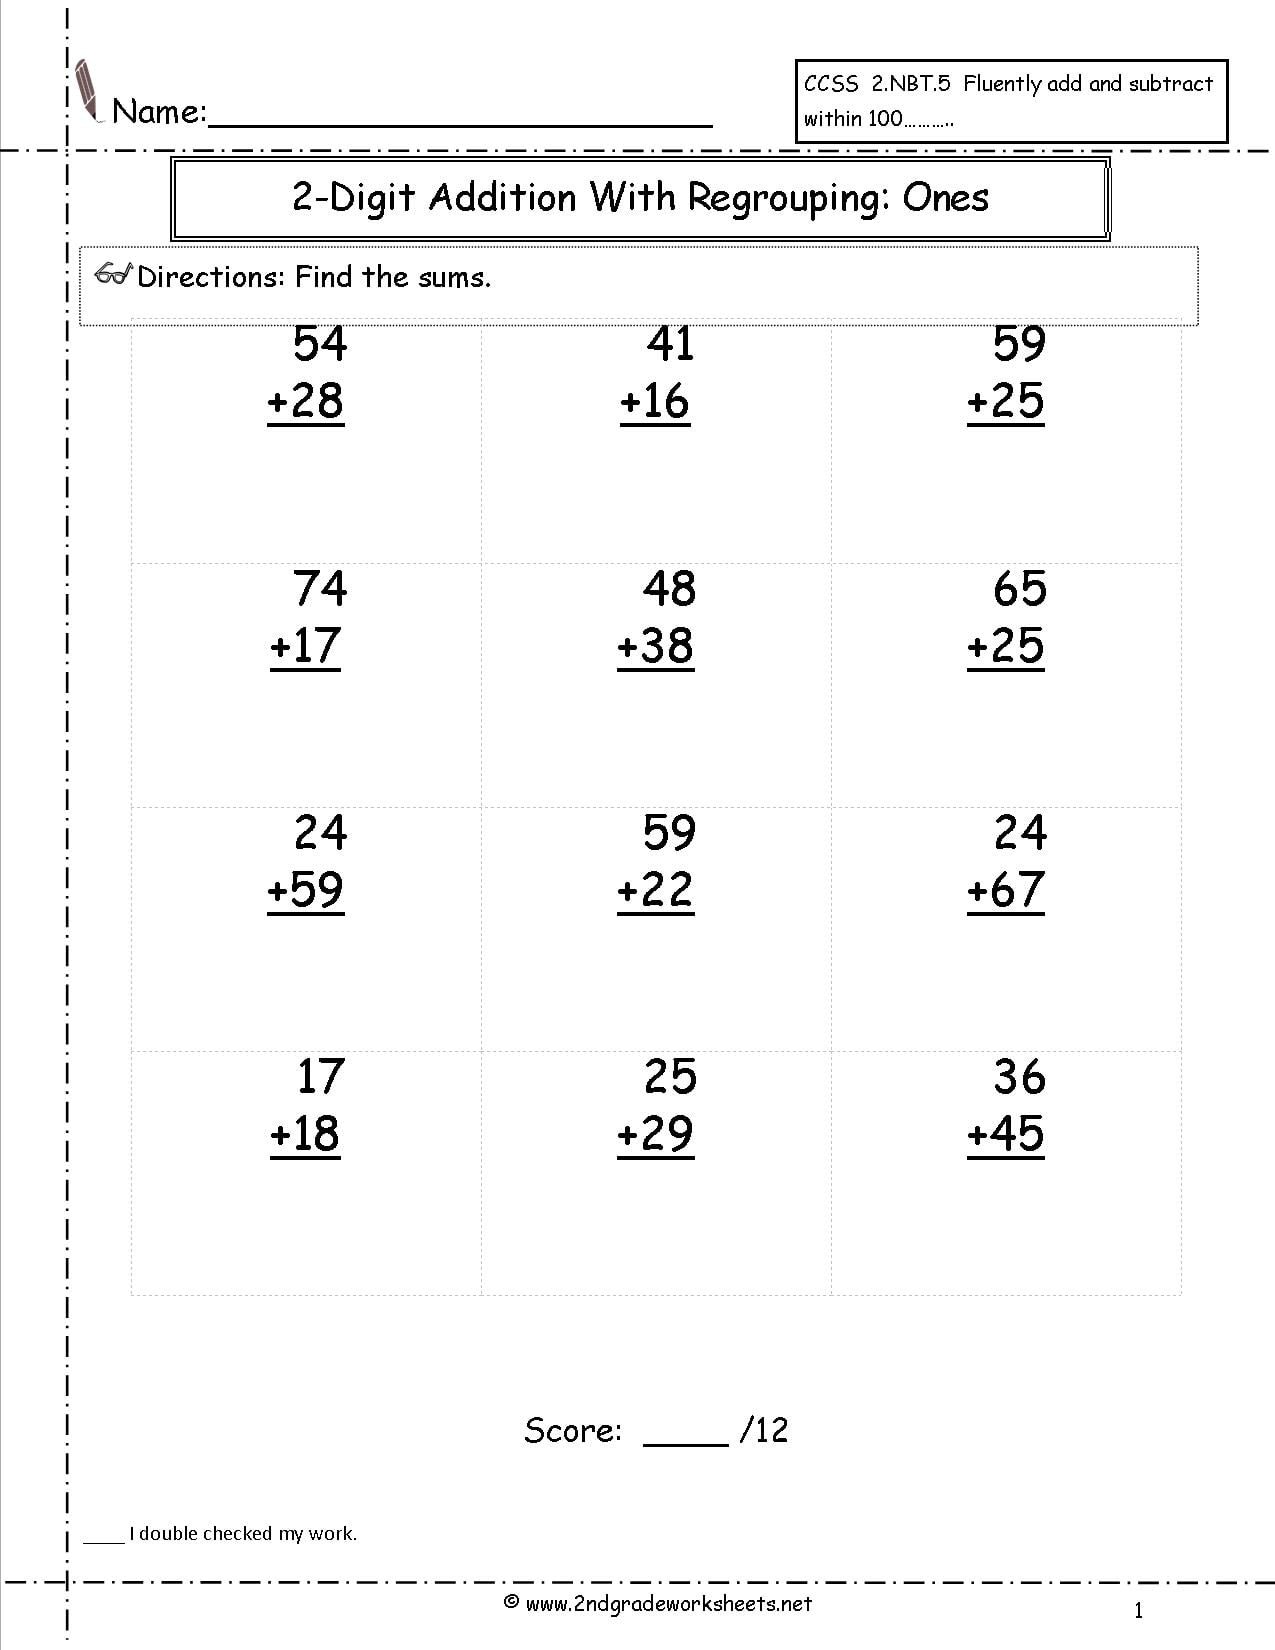 winter-2-digit-addition-with-regrouping-color-by-code-printables-elementary-school-math